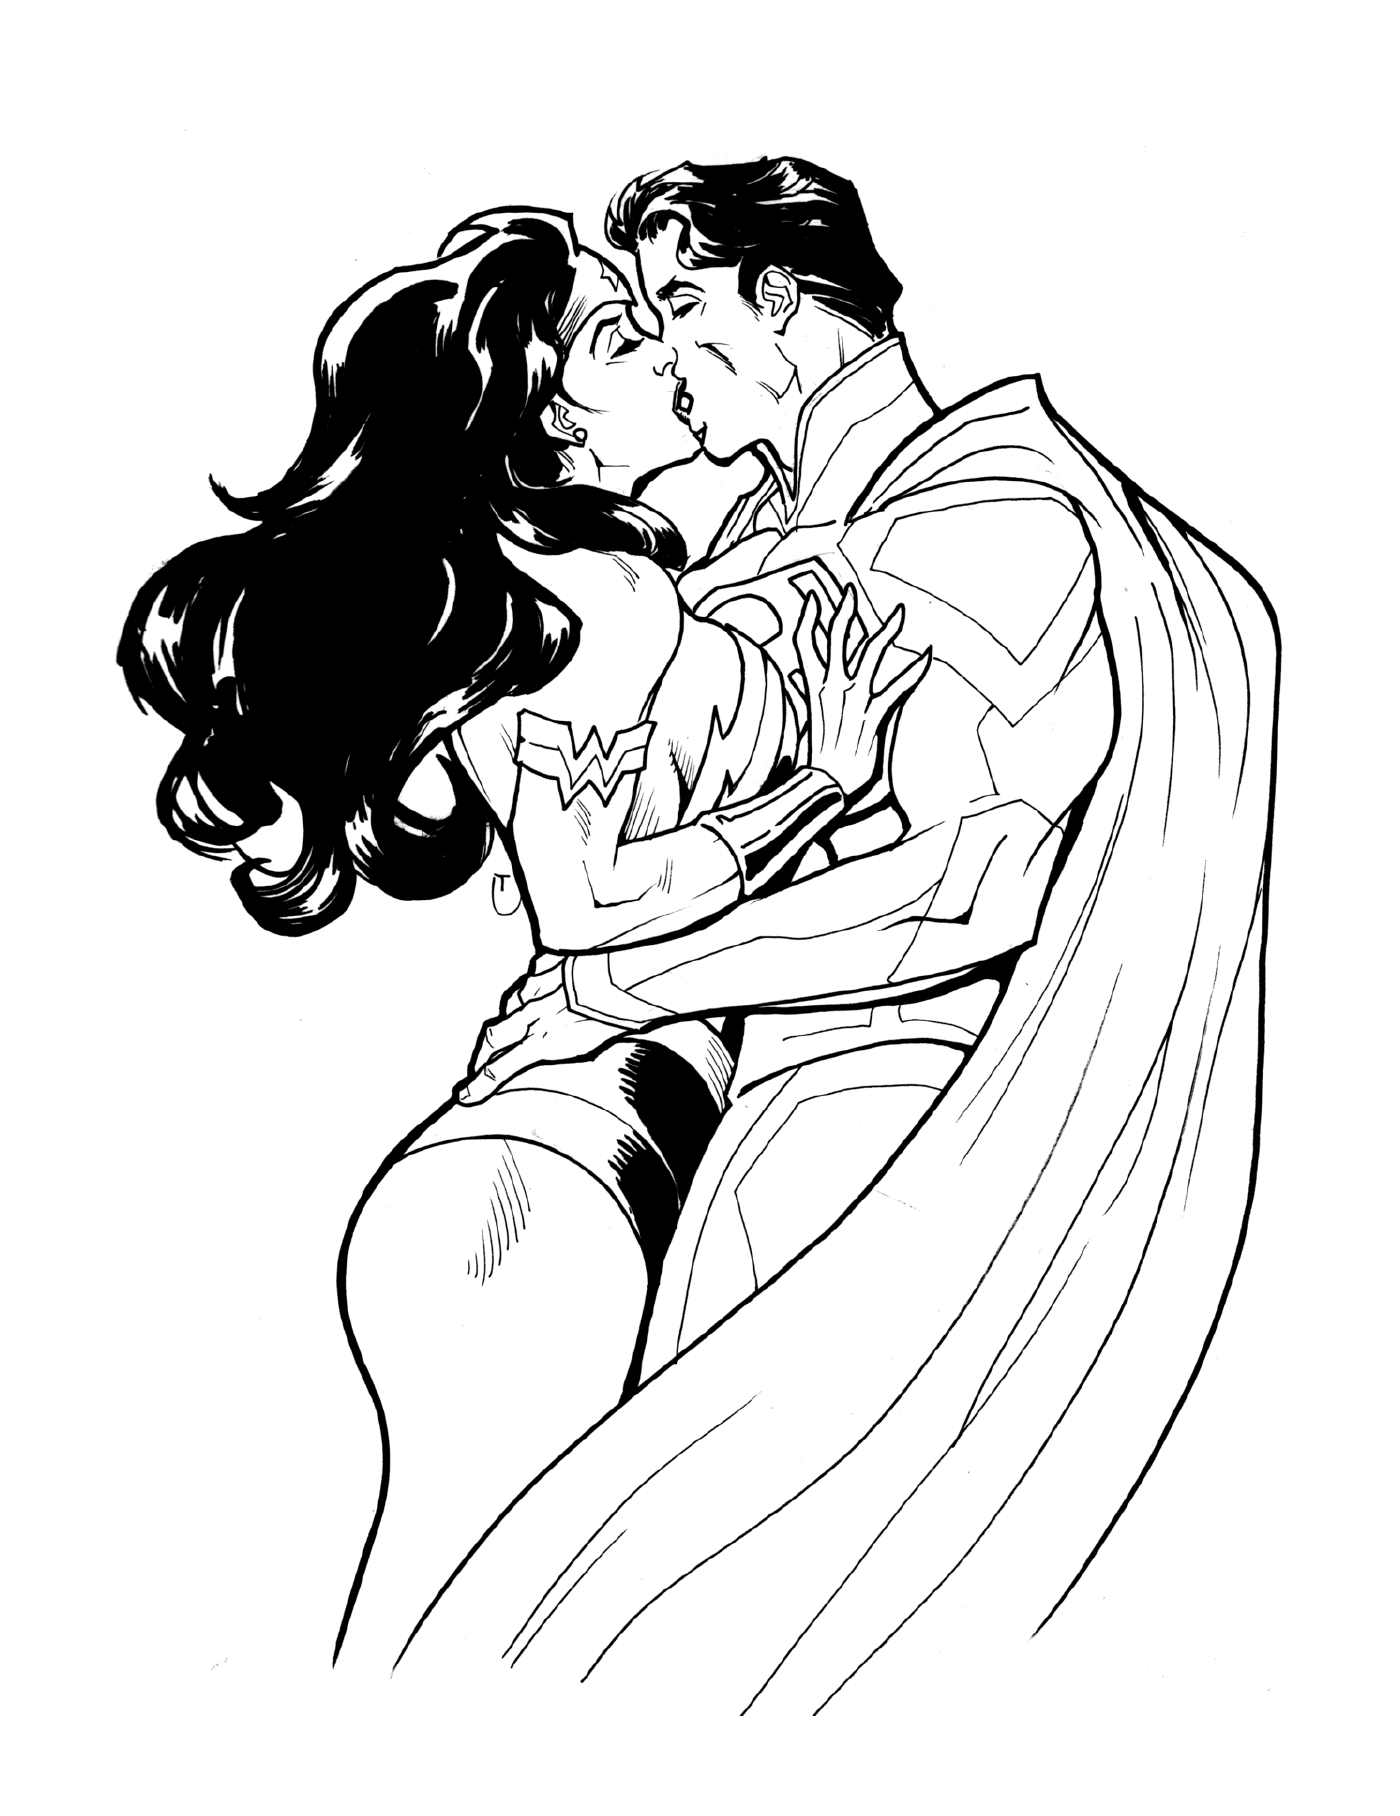  Wonder Woman in love with Superman 